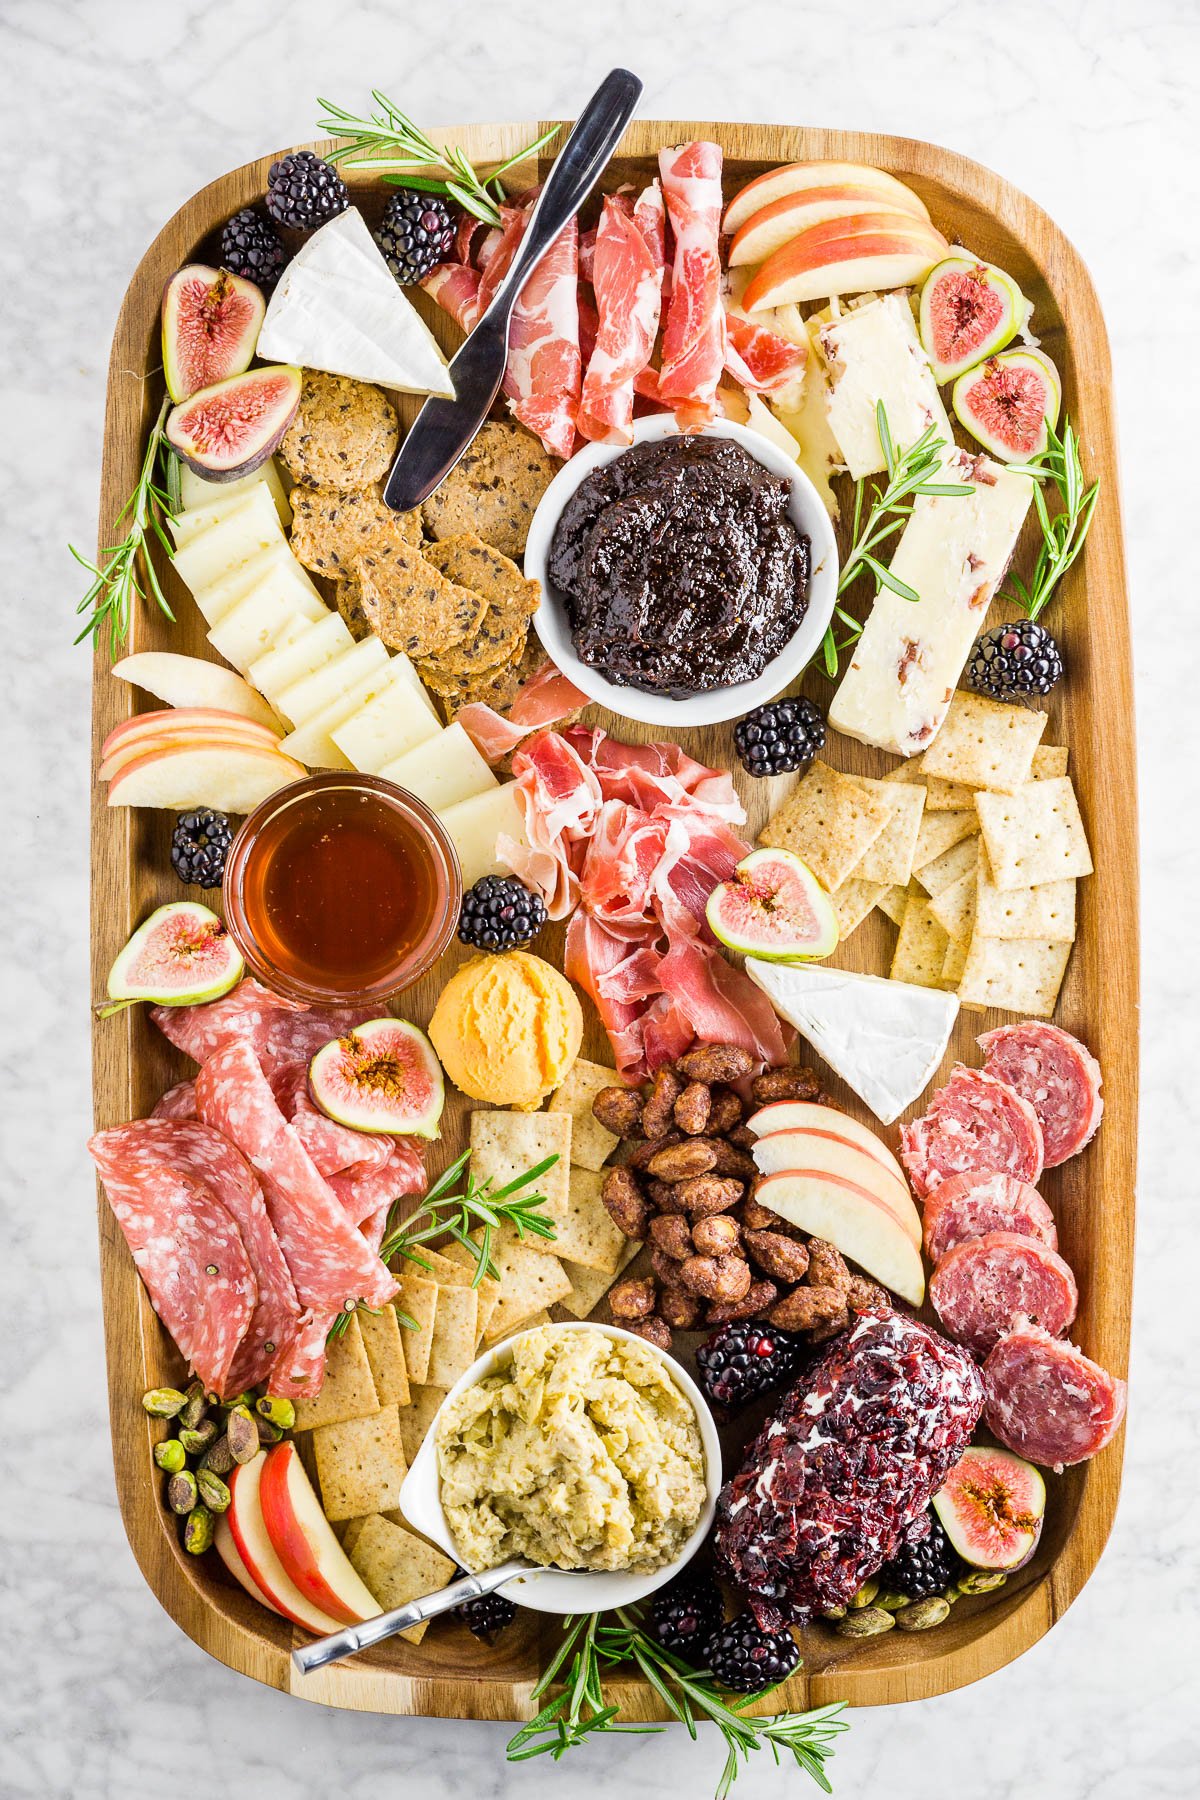 How To Make A Fall Harvest Charcuterie Board